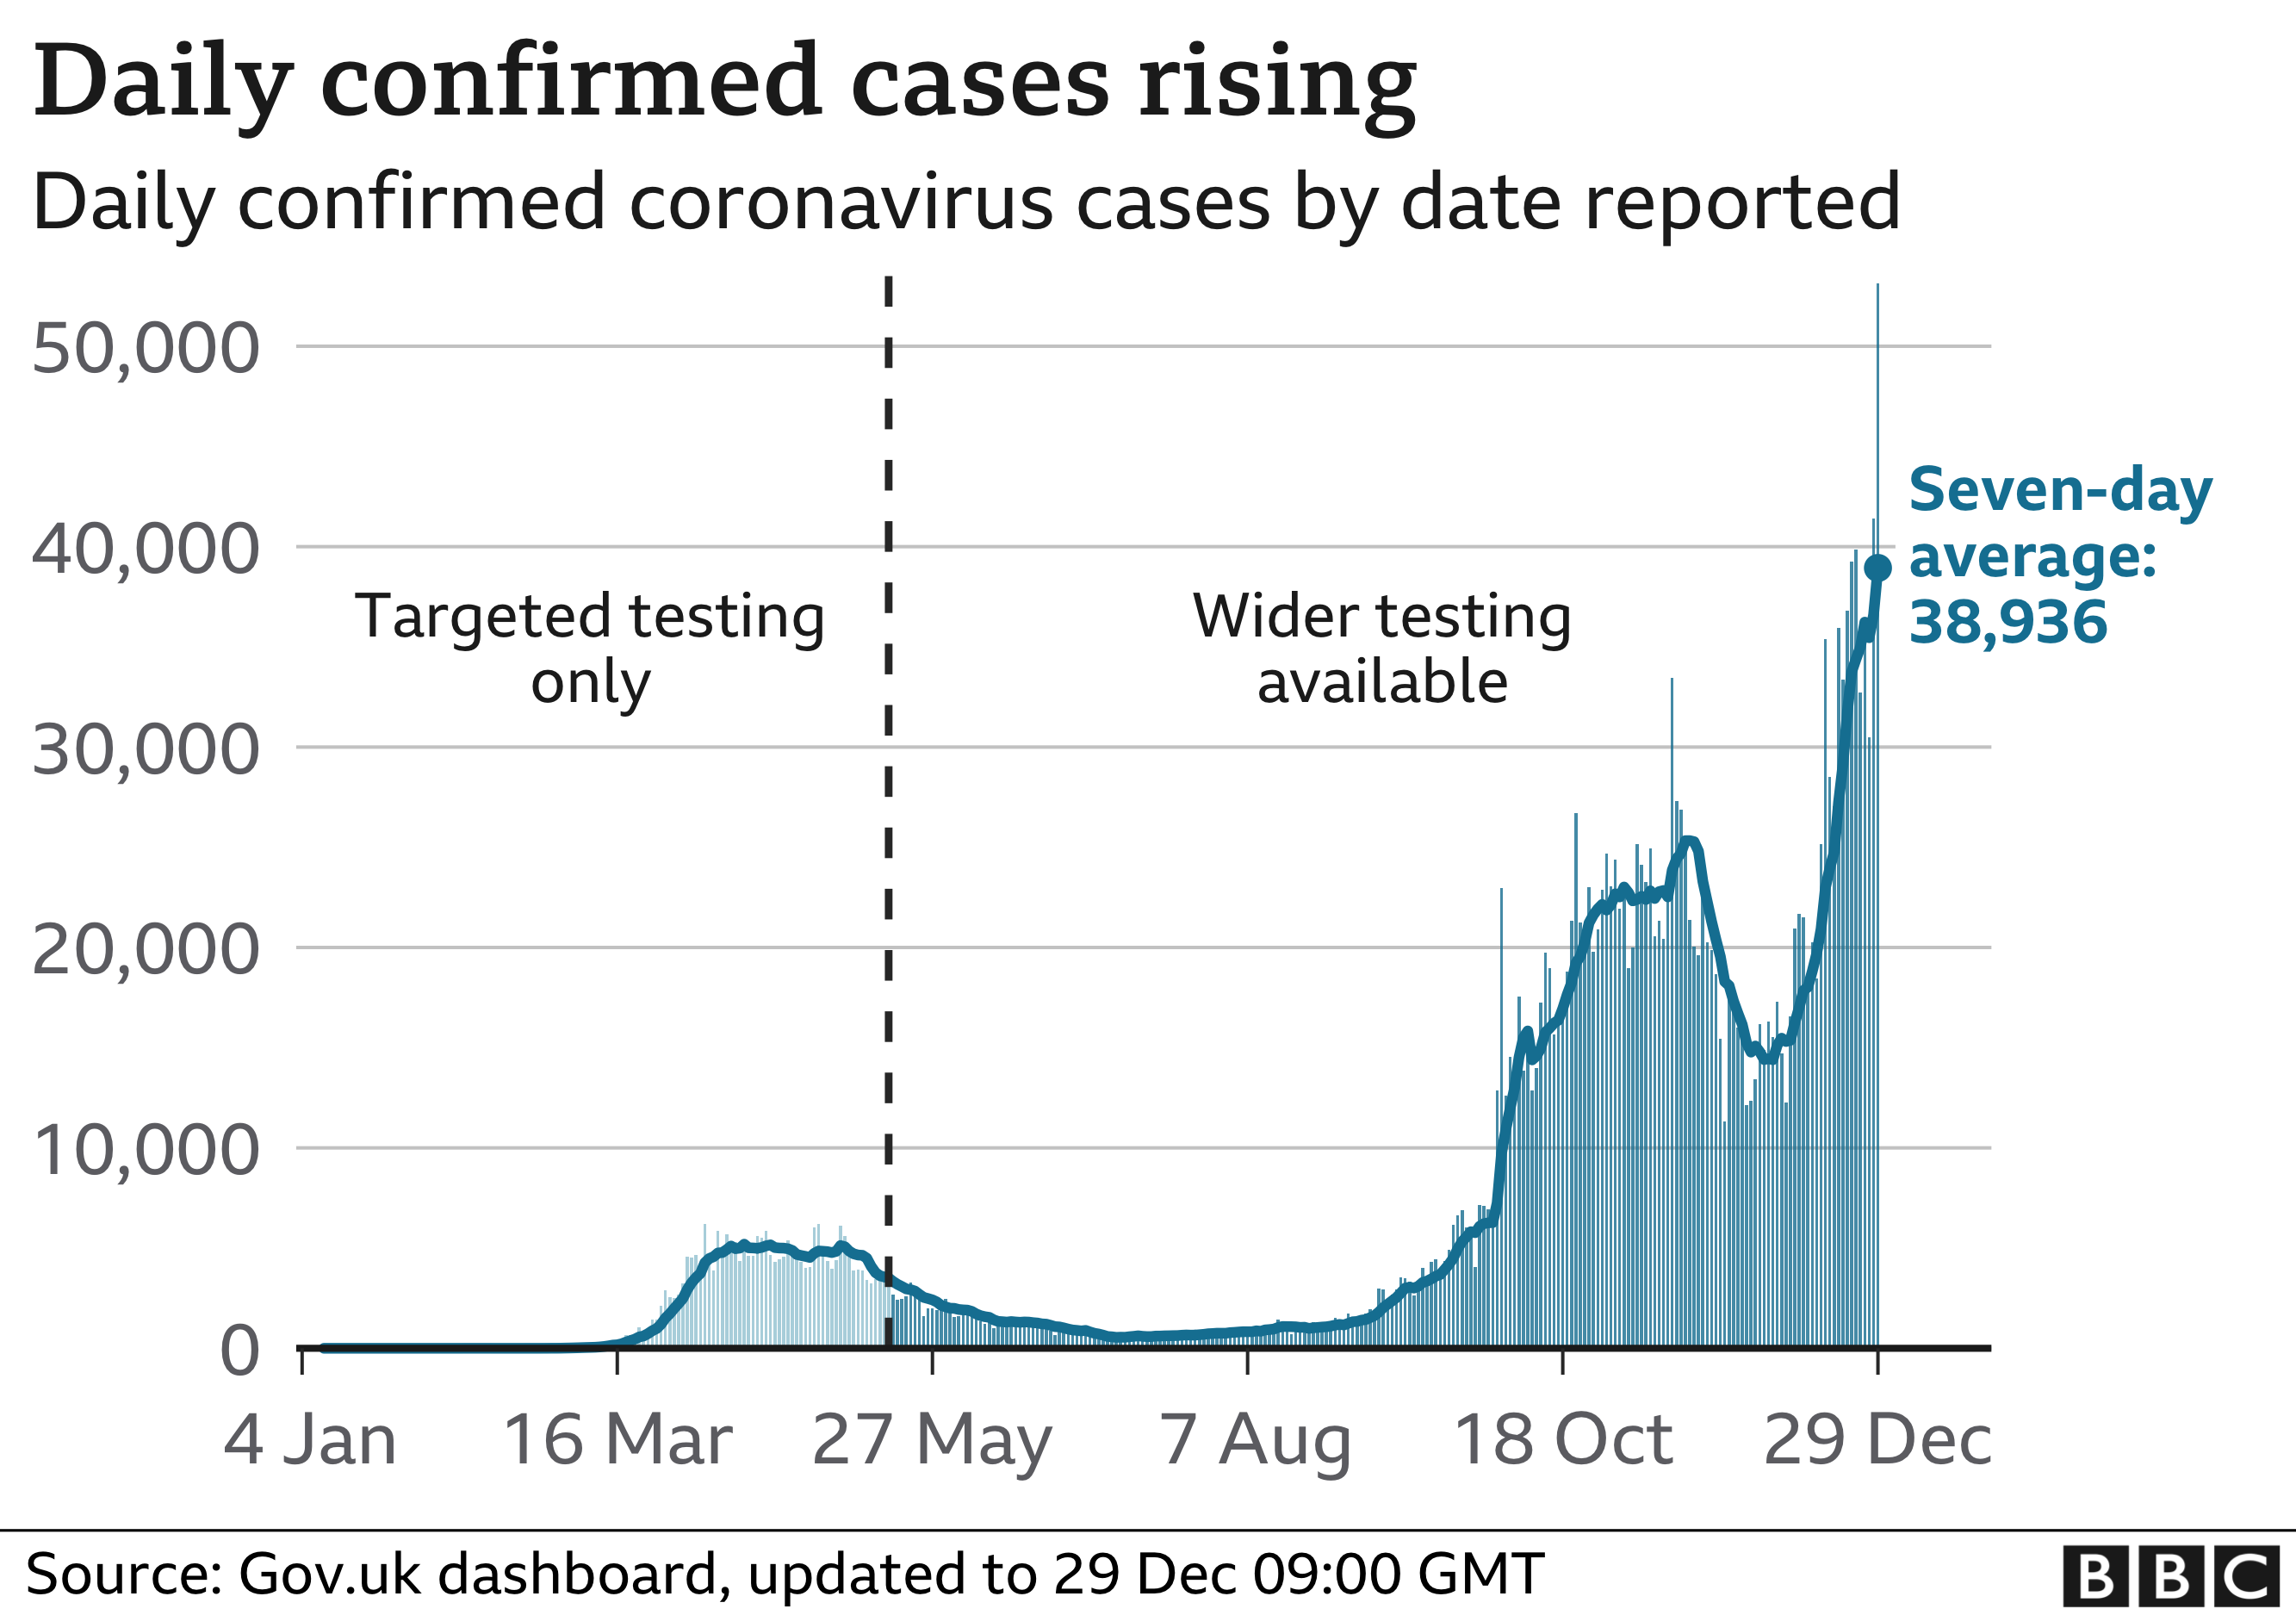 Daily confirmed cases rising 29-12-2020 - enlarge